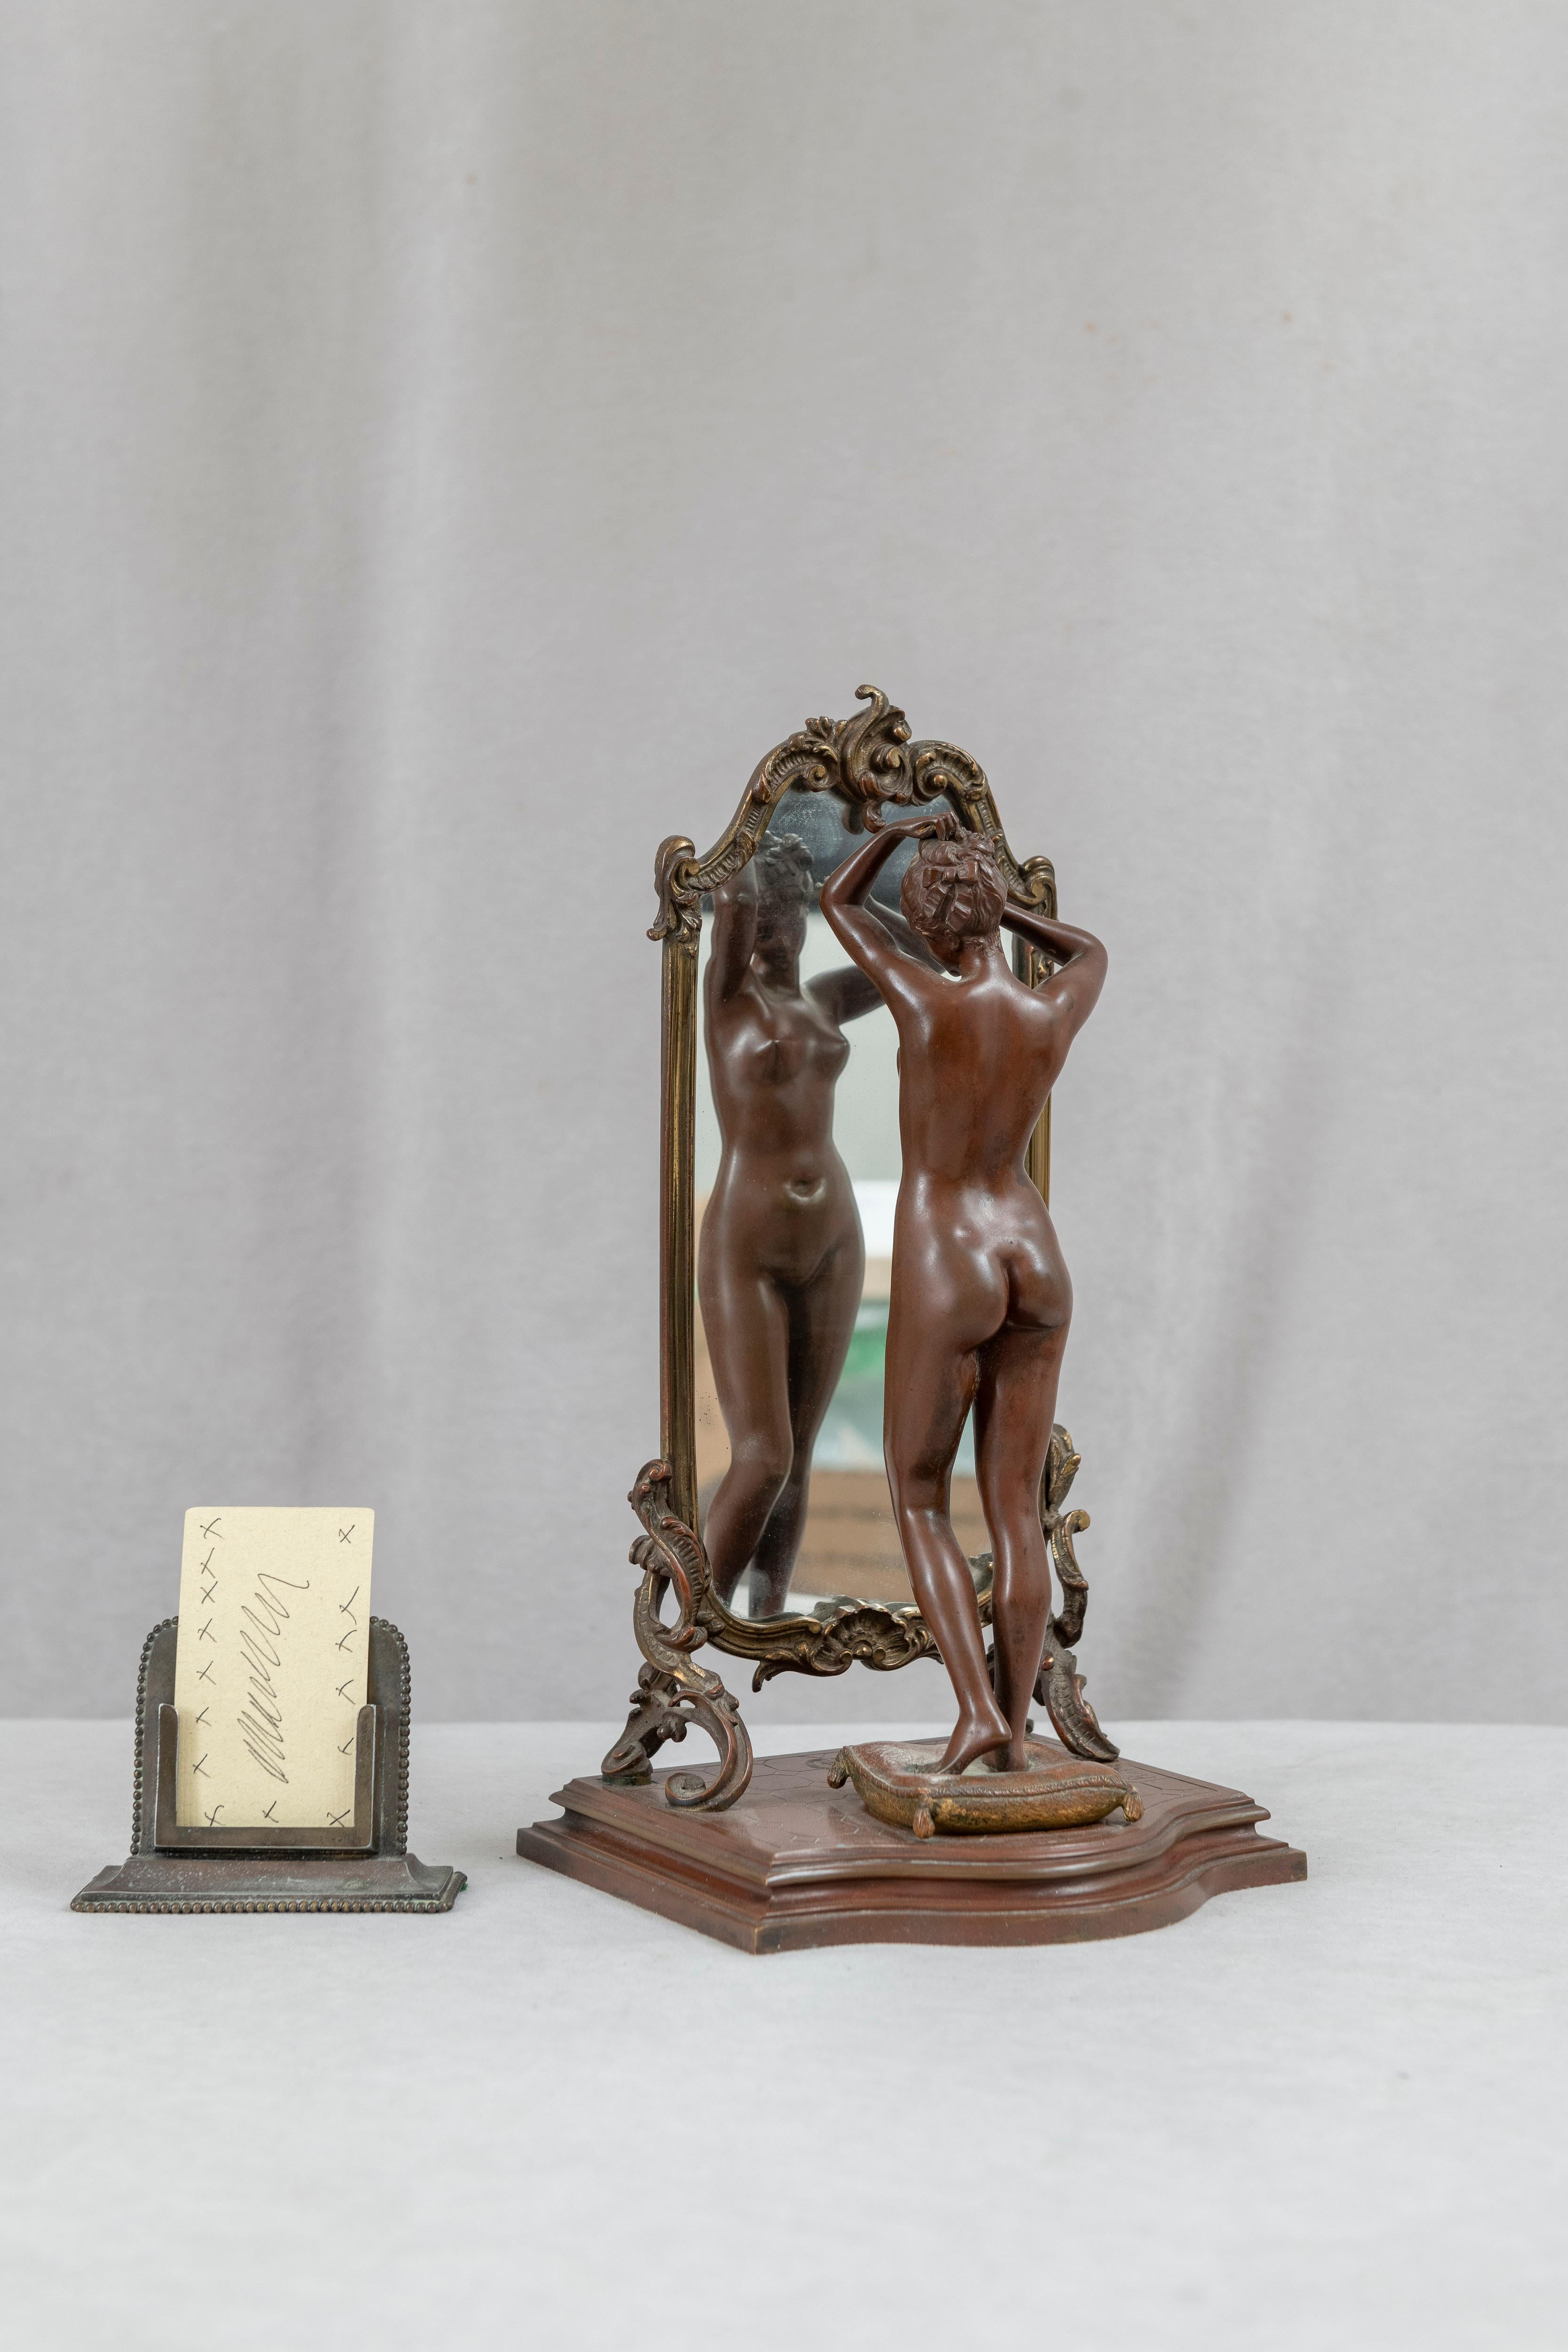 This bronze has all the ingredients needed to make it very special. The subject matter a sexy nude beauty looking into a Cheval mirror, the  patina, detailed casting, and remarkable condition are all there. The nude young lady is a beauty, and her